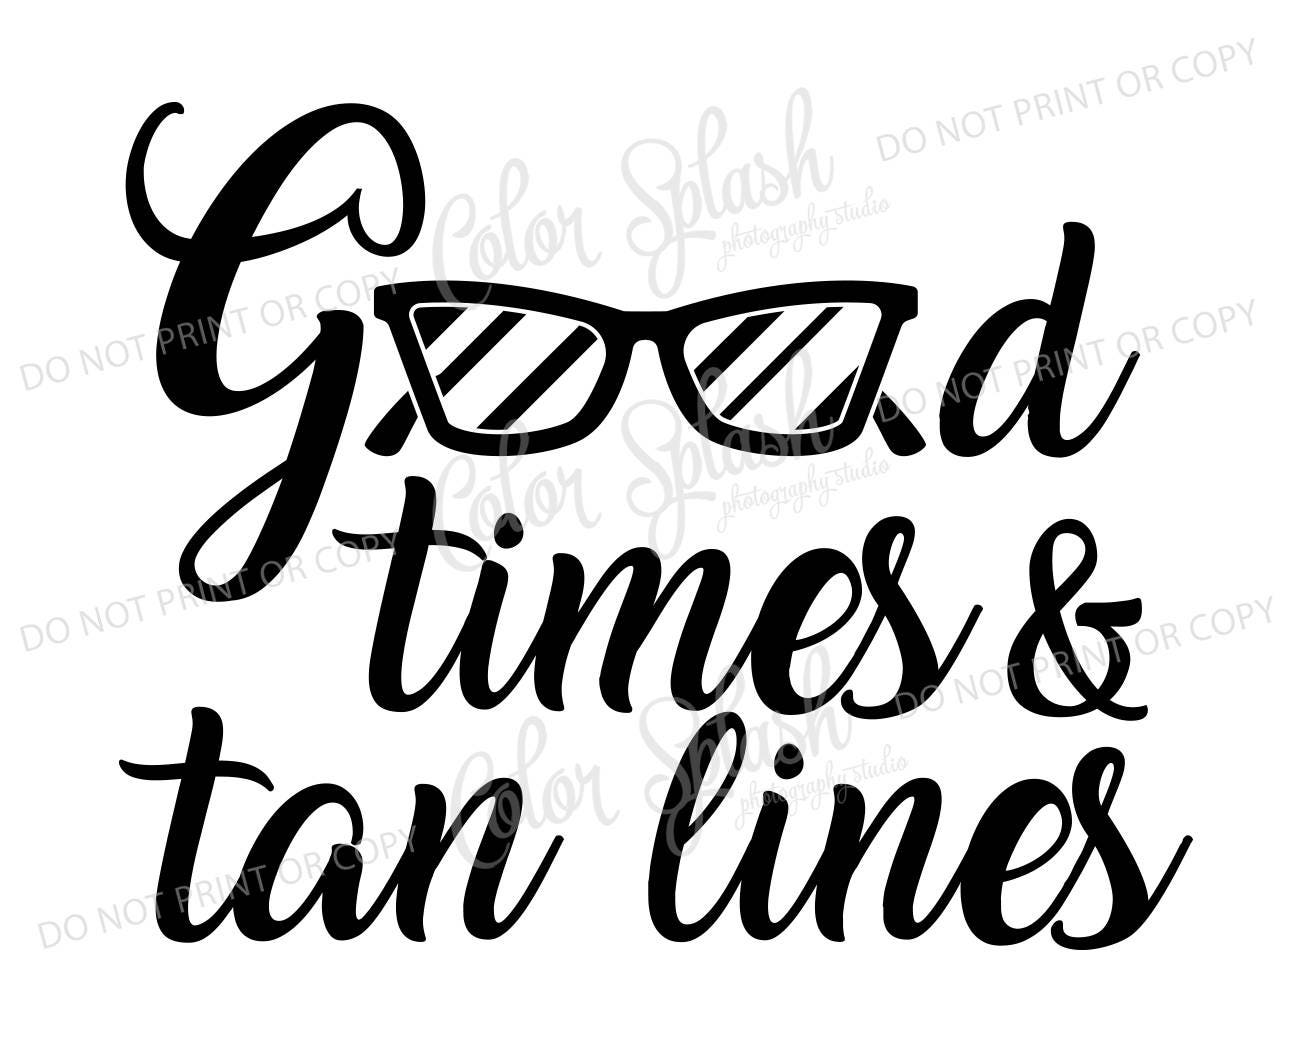 Good times and tan lines svg eps dxf png silhouette cameo | Etsy